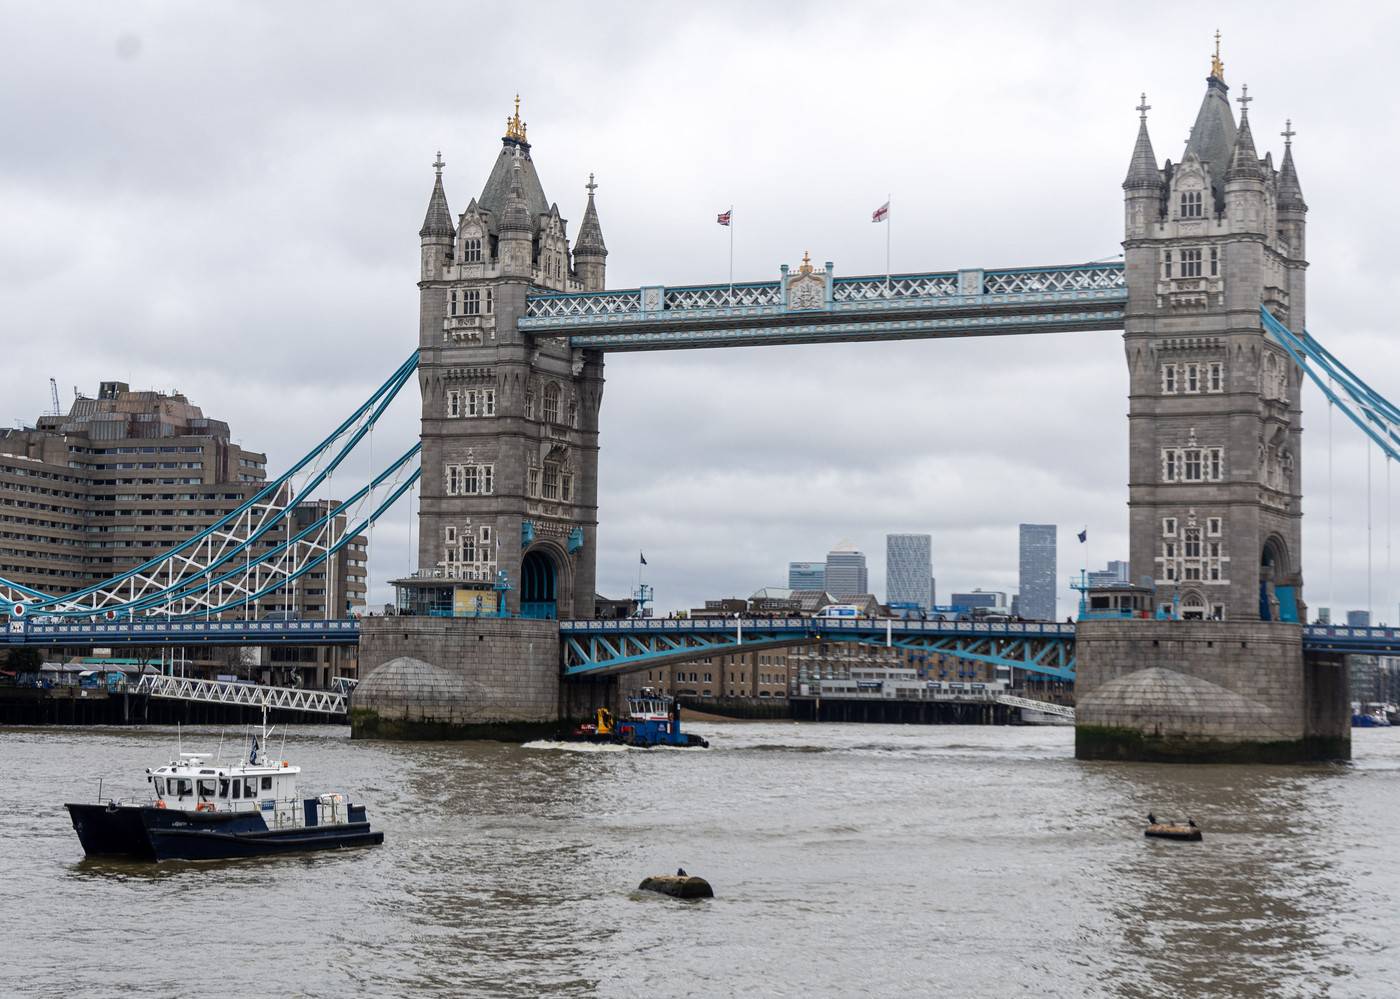 Police recover a body in the River Thames in London, UK.